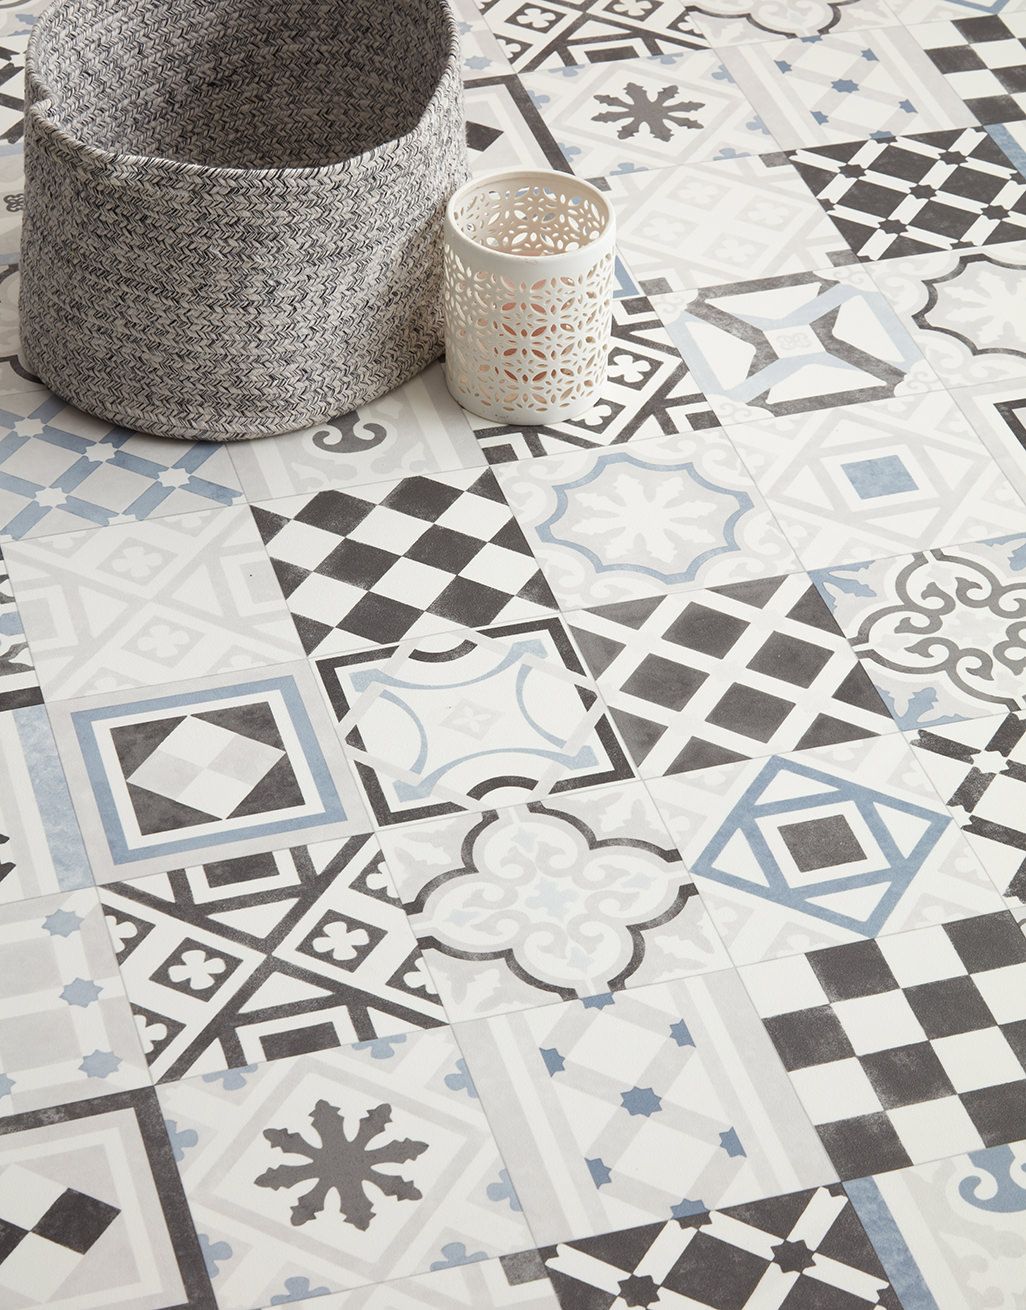 Patterned Tiles - Mosaic 2